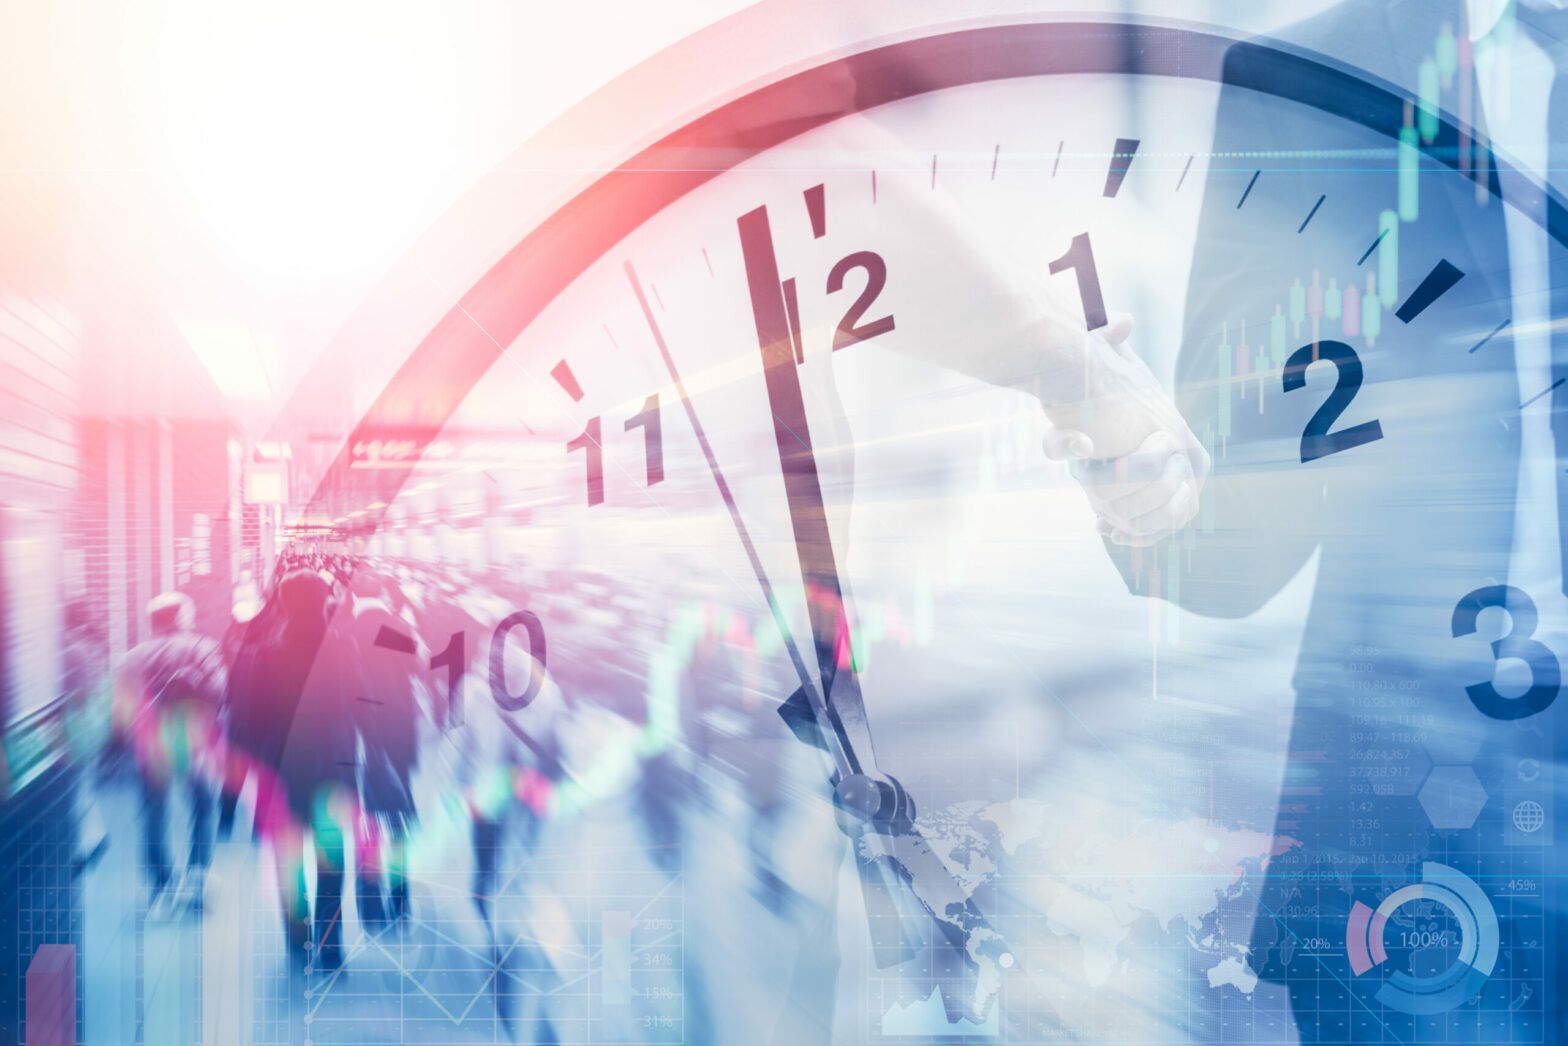 UK companies urged to commit to Living Hours initiative